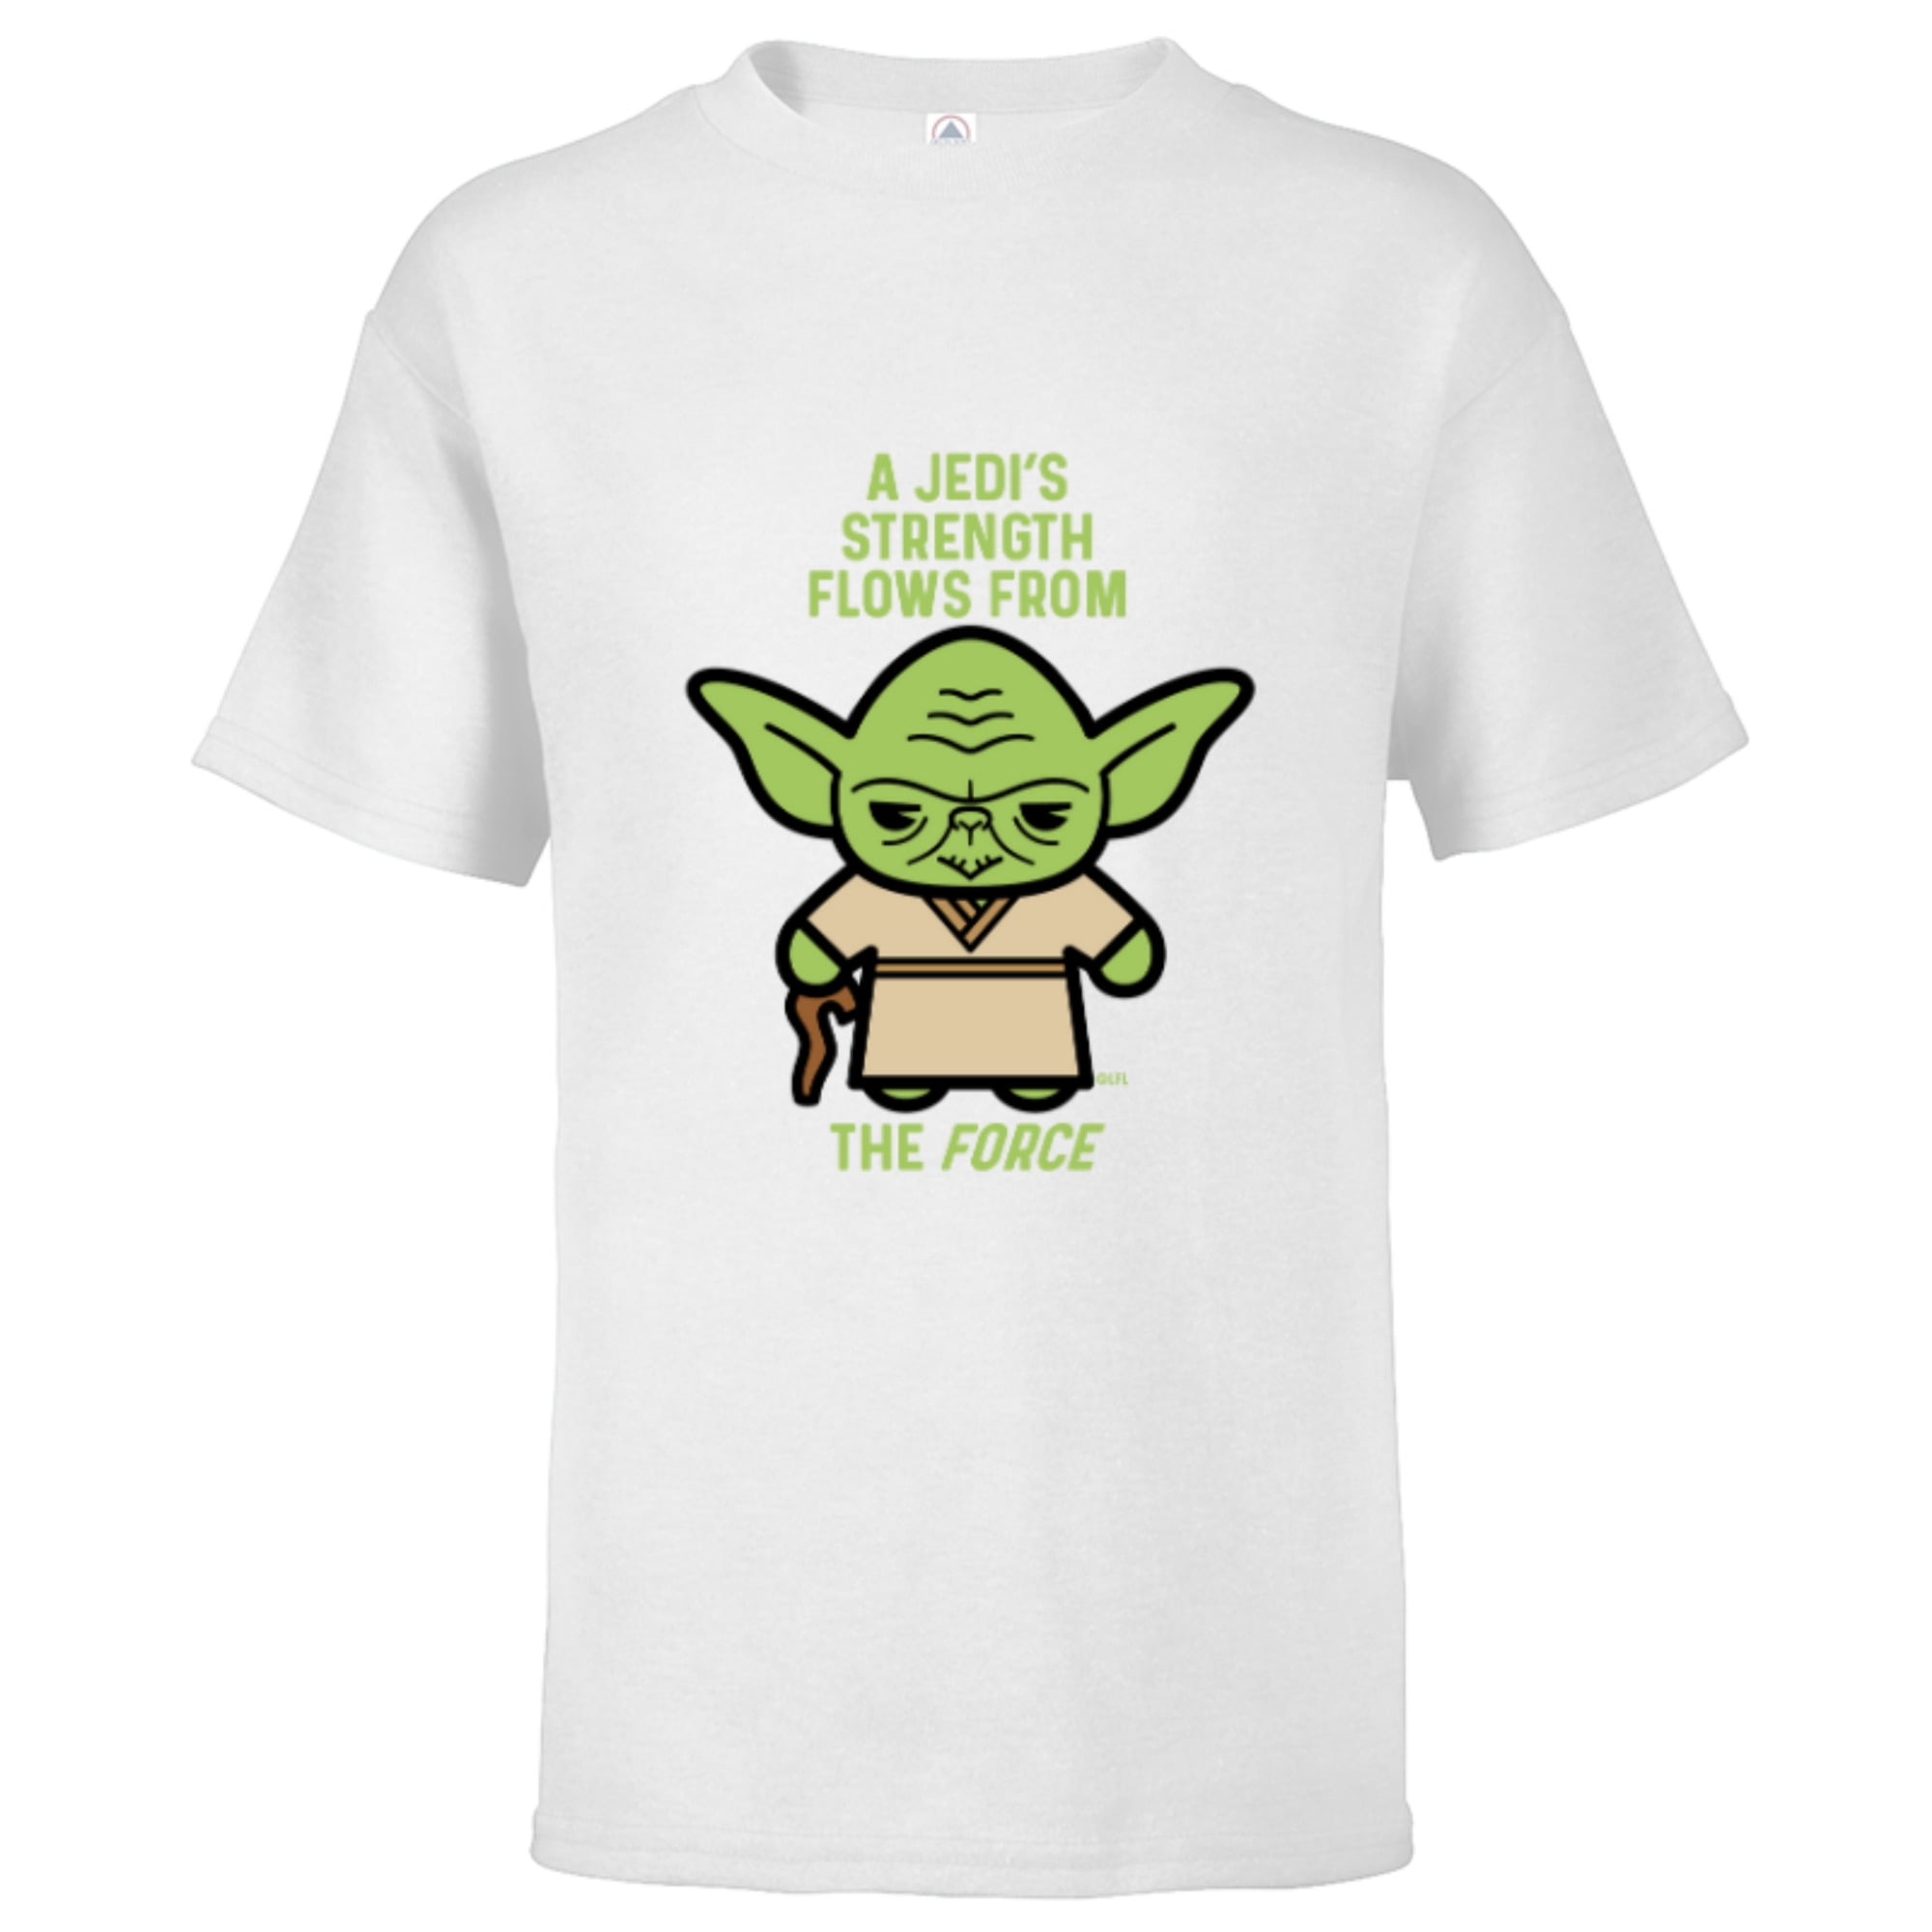 Star Wars Yoda Quote A Jedi's Strength Flows from the Force - Short Sleeve T -Shirt for Kids - Customized-White